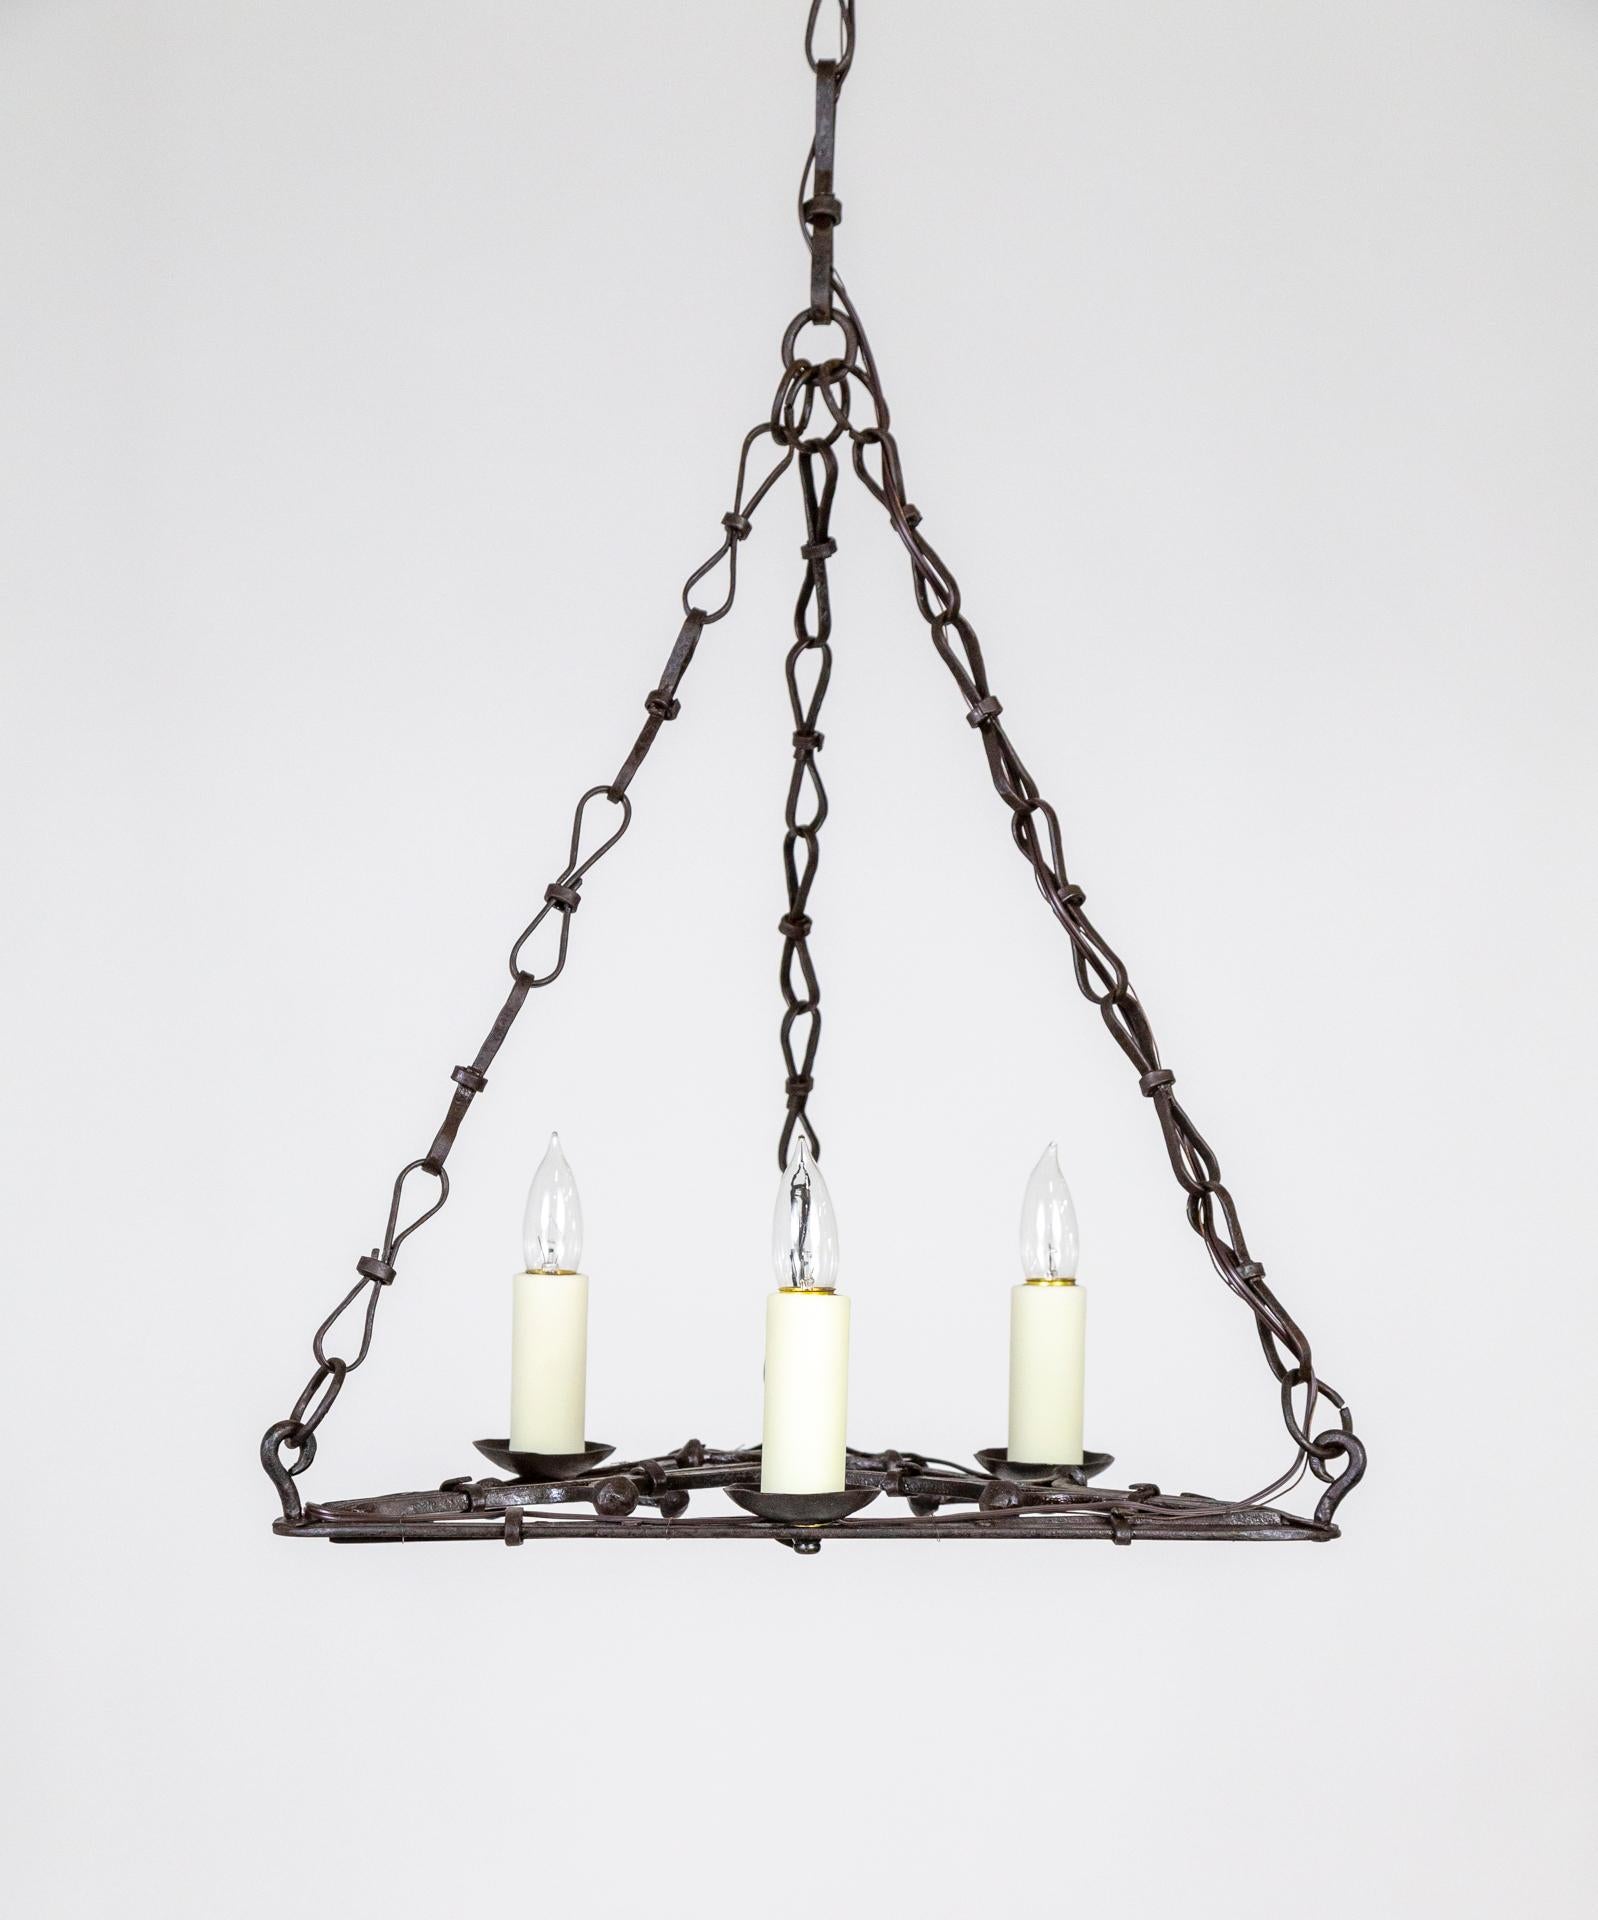 20th Century Flat Triangular Wrought Iron Gothic Revival 3-Light Chandelier For Sale